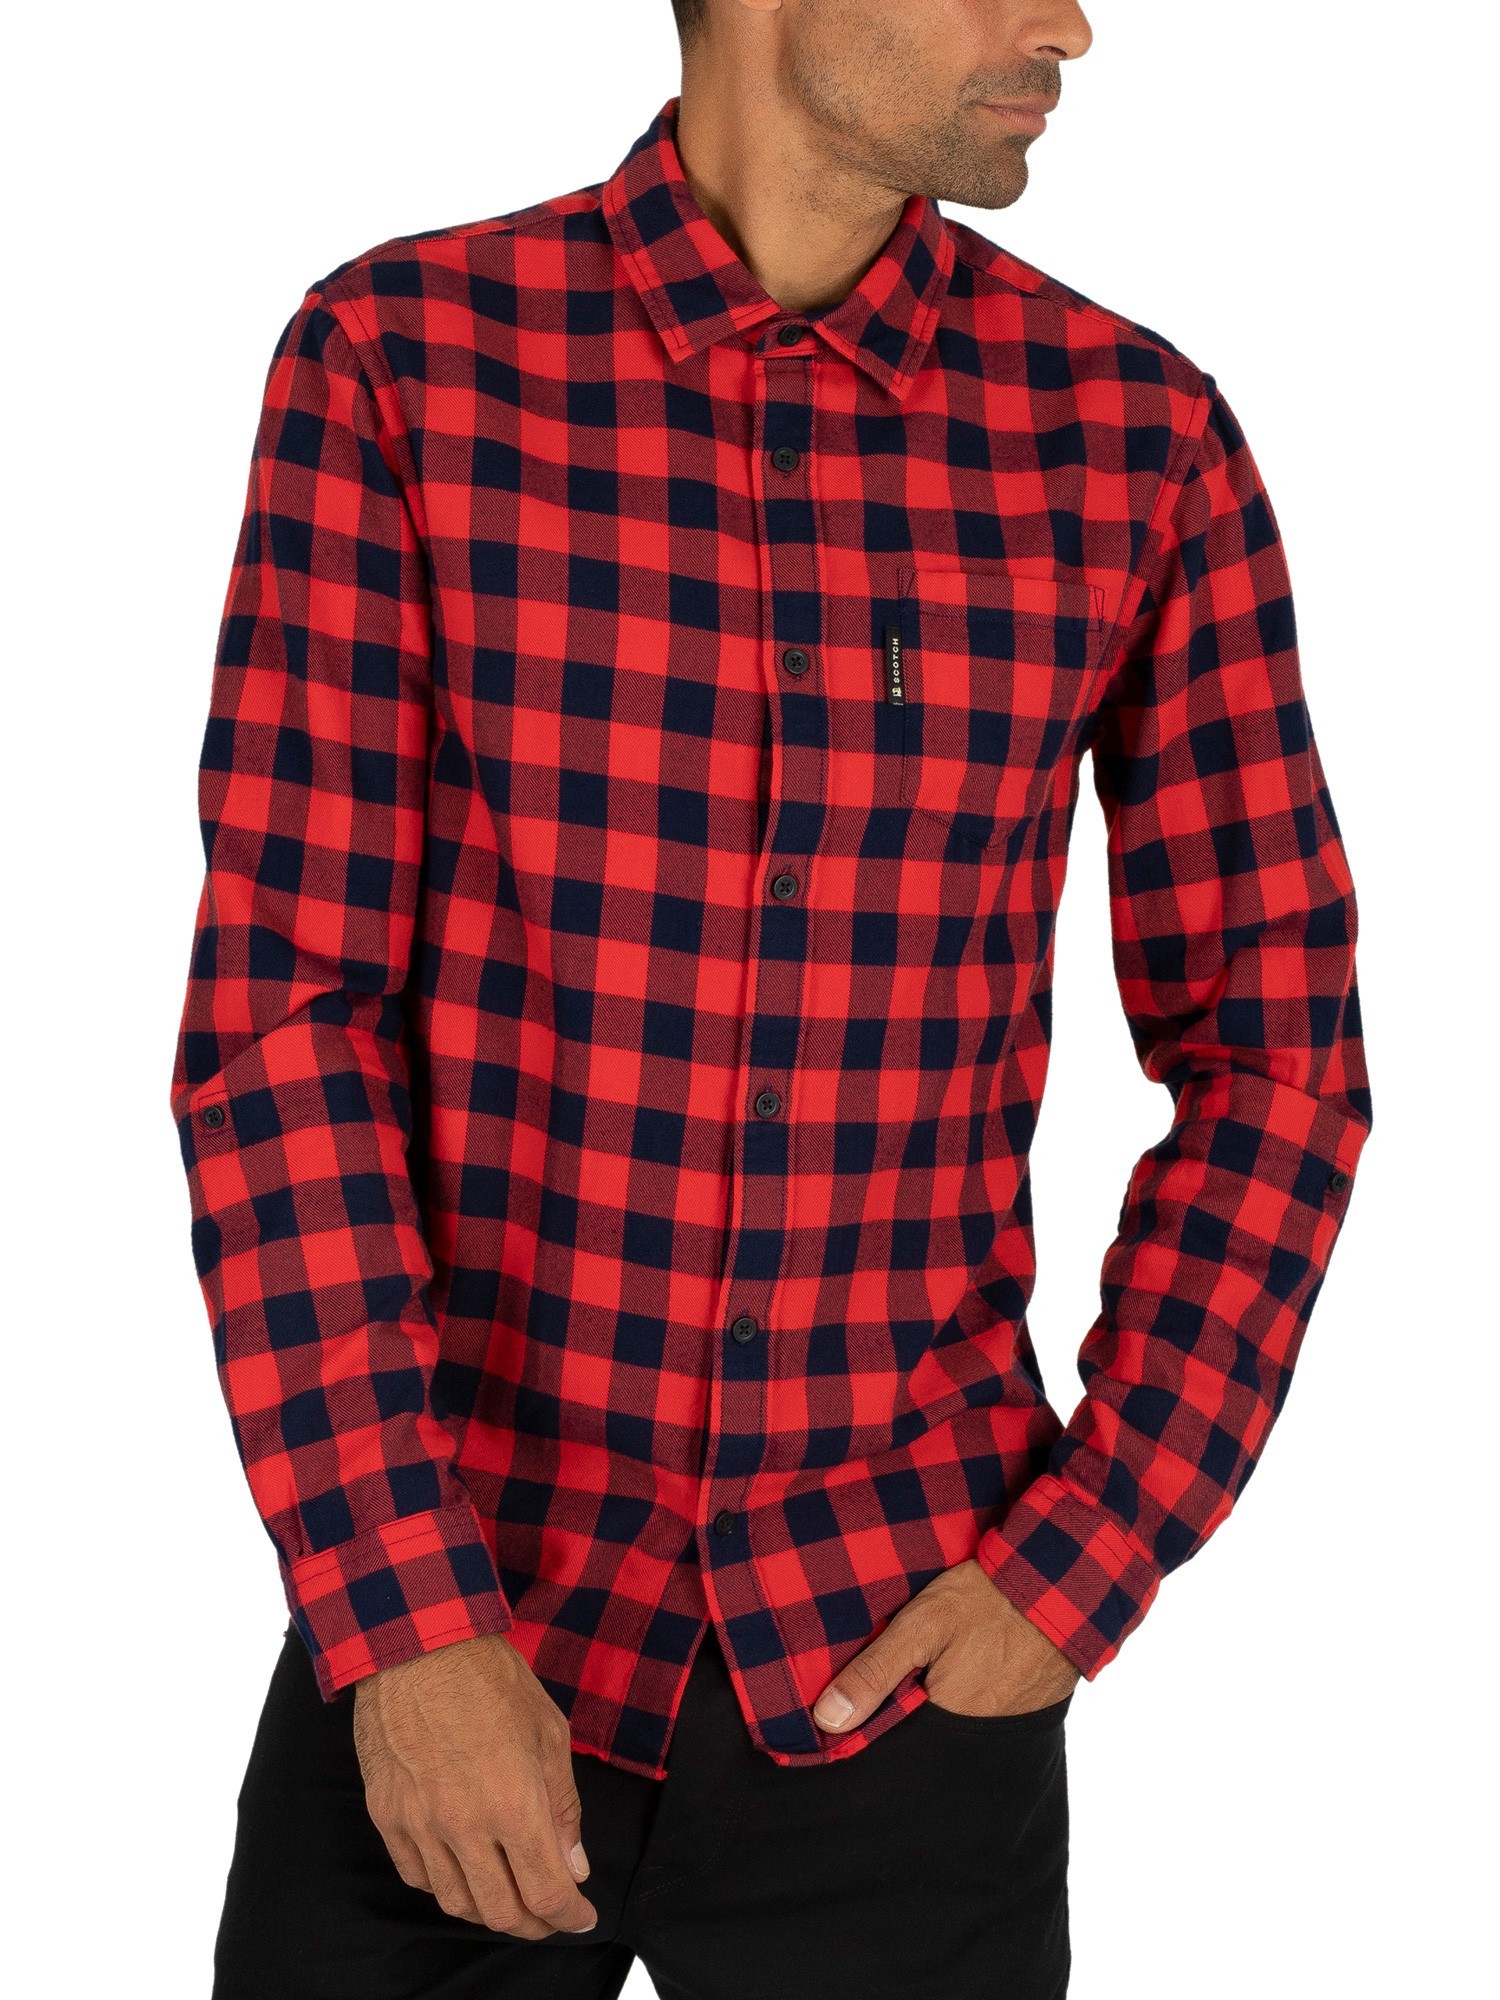 Scotch & Soda Bright Check Flannel Shirt - Red | Standout